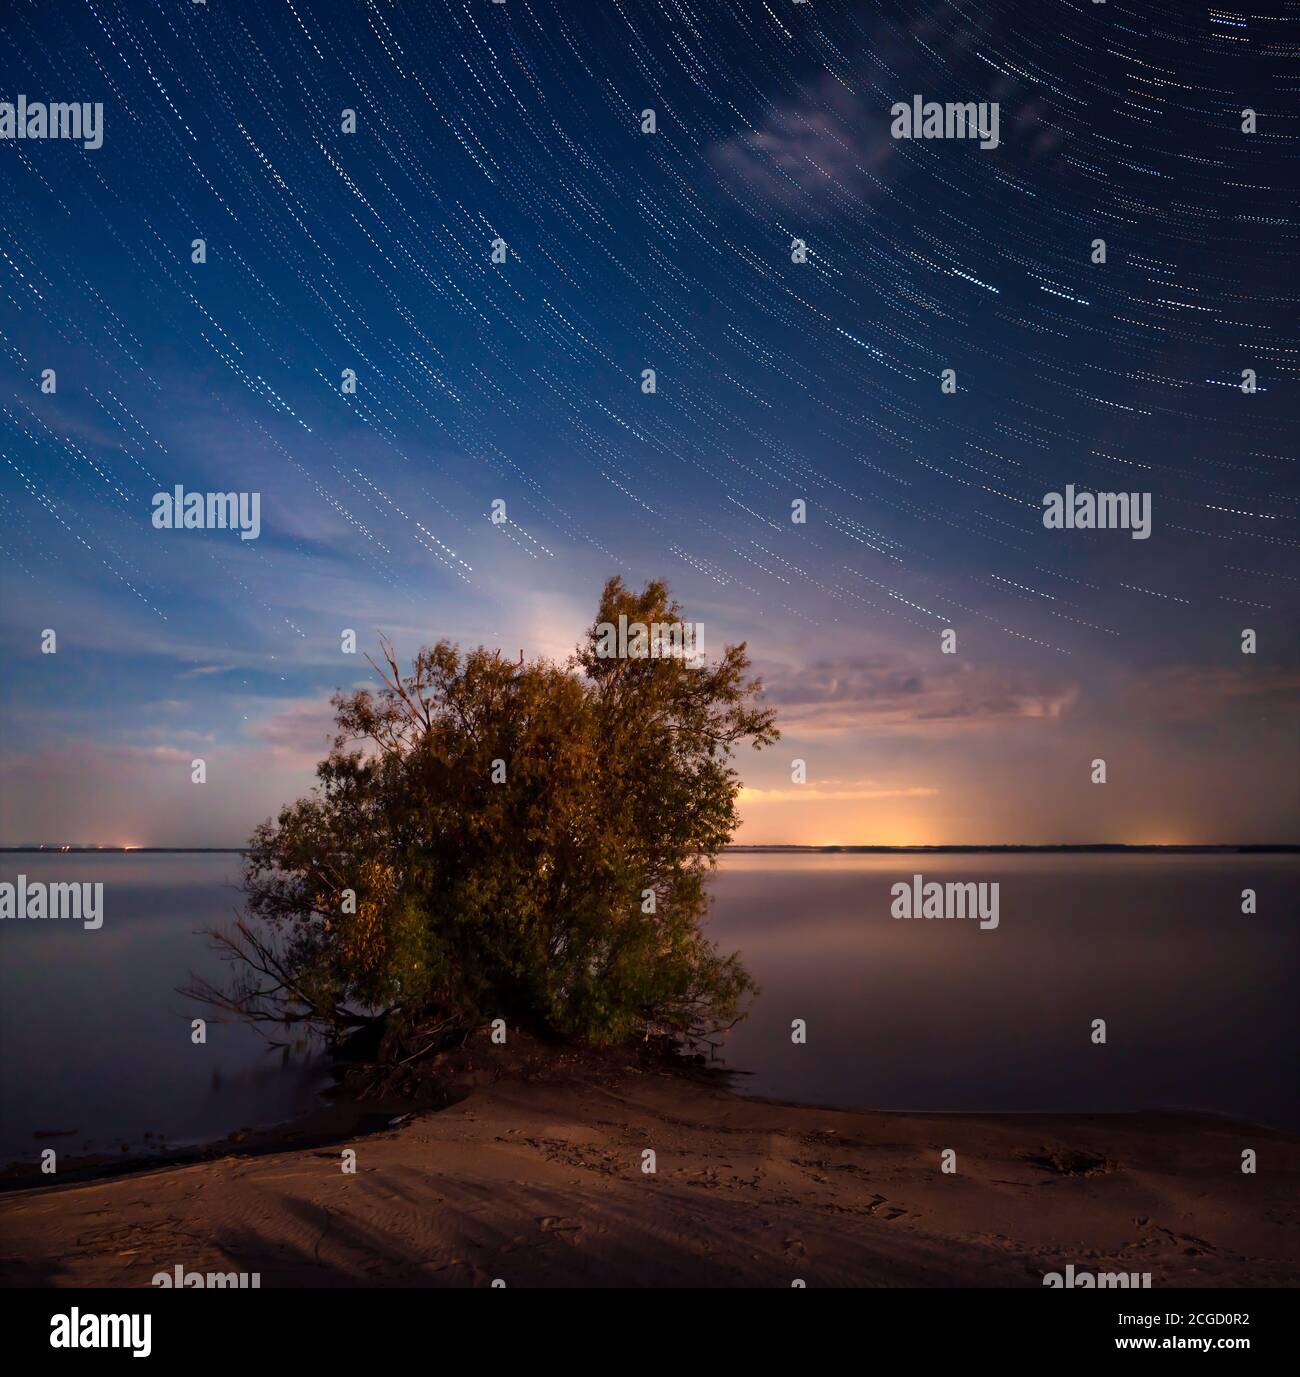 willow tree on beach by river lit by fire light against star trails in sky Stock Photo